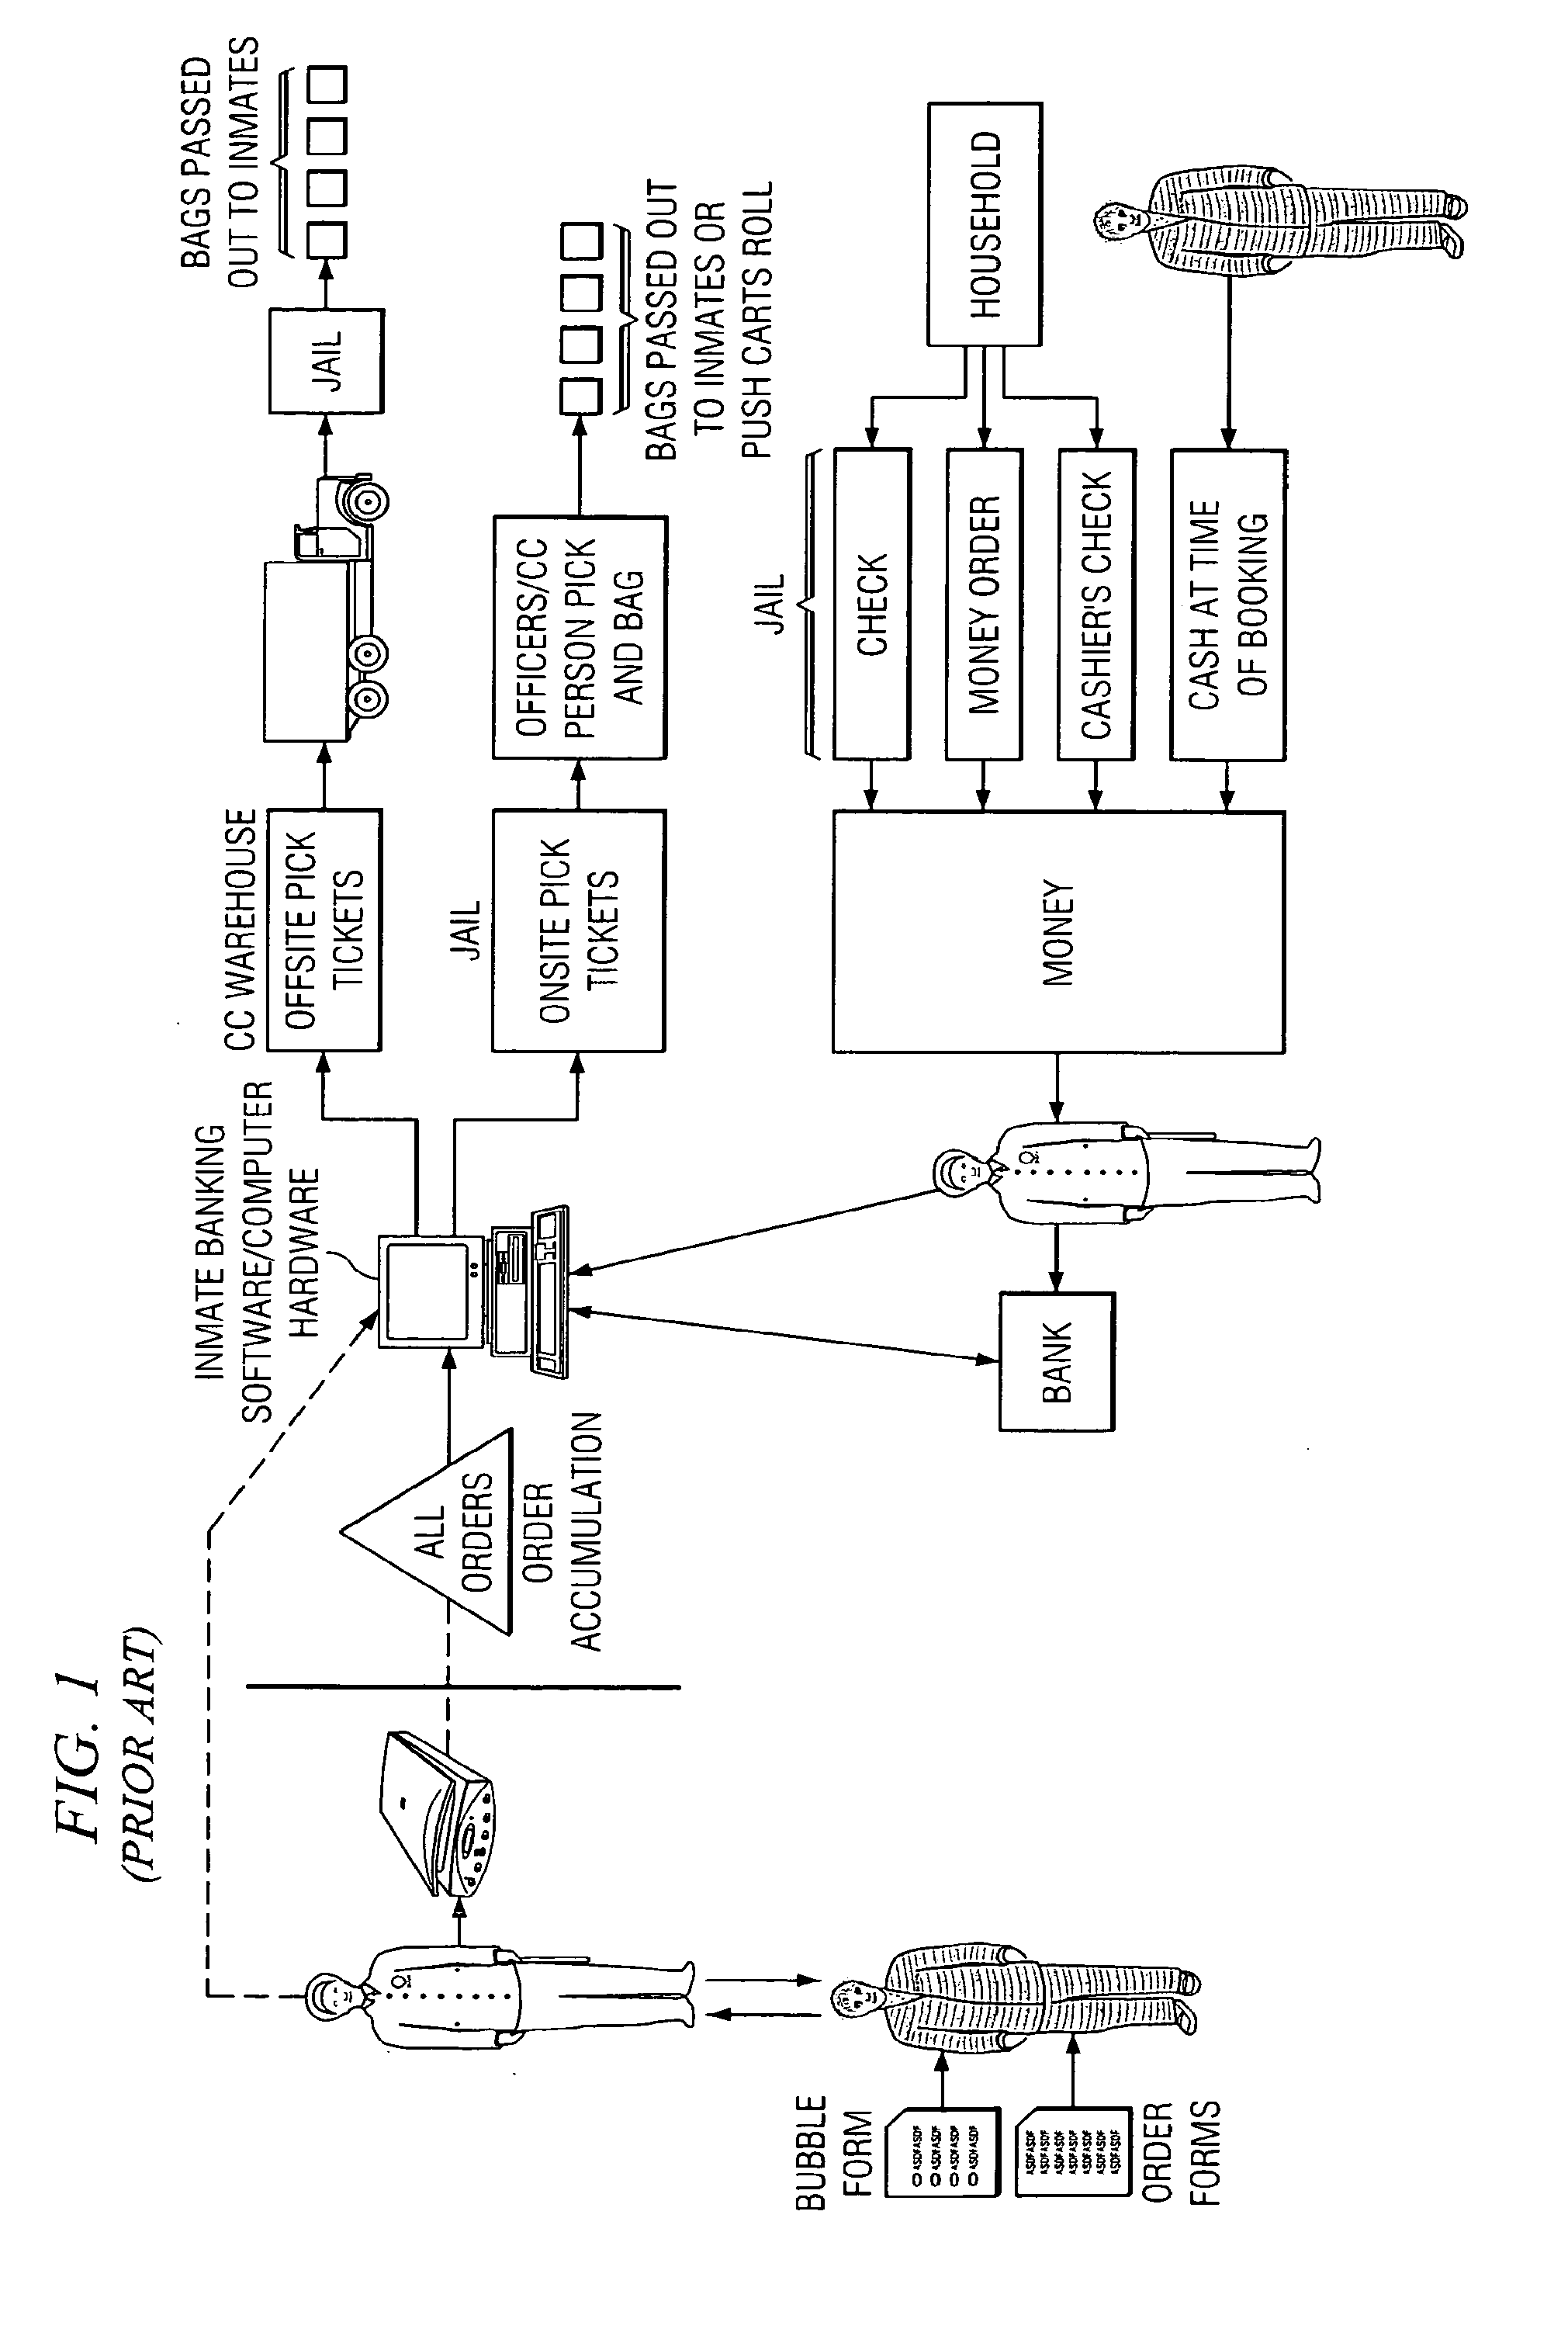 Systems and Methods for Transaction and Information Management